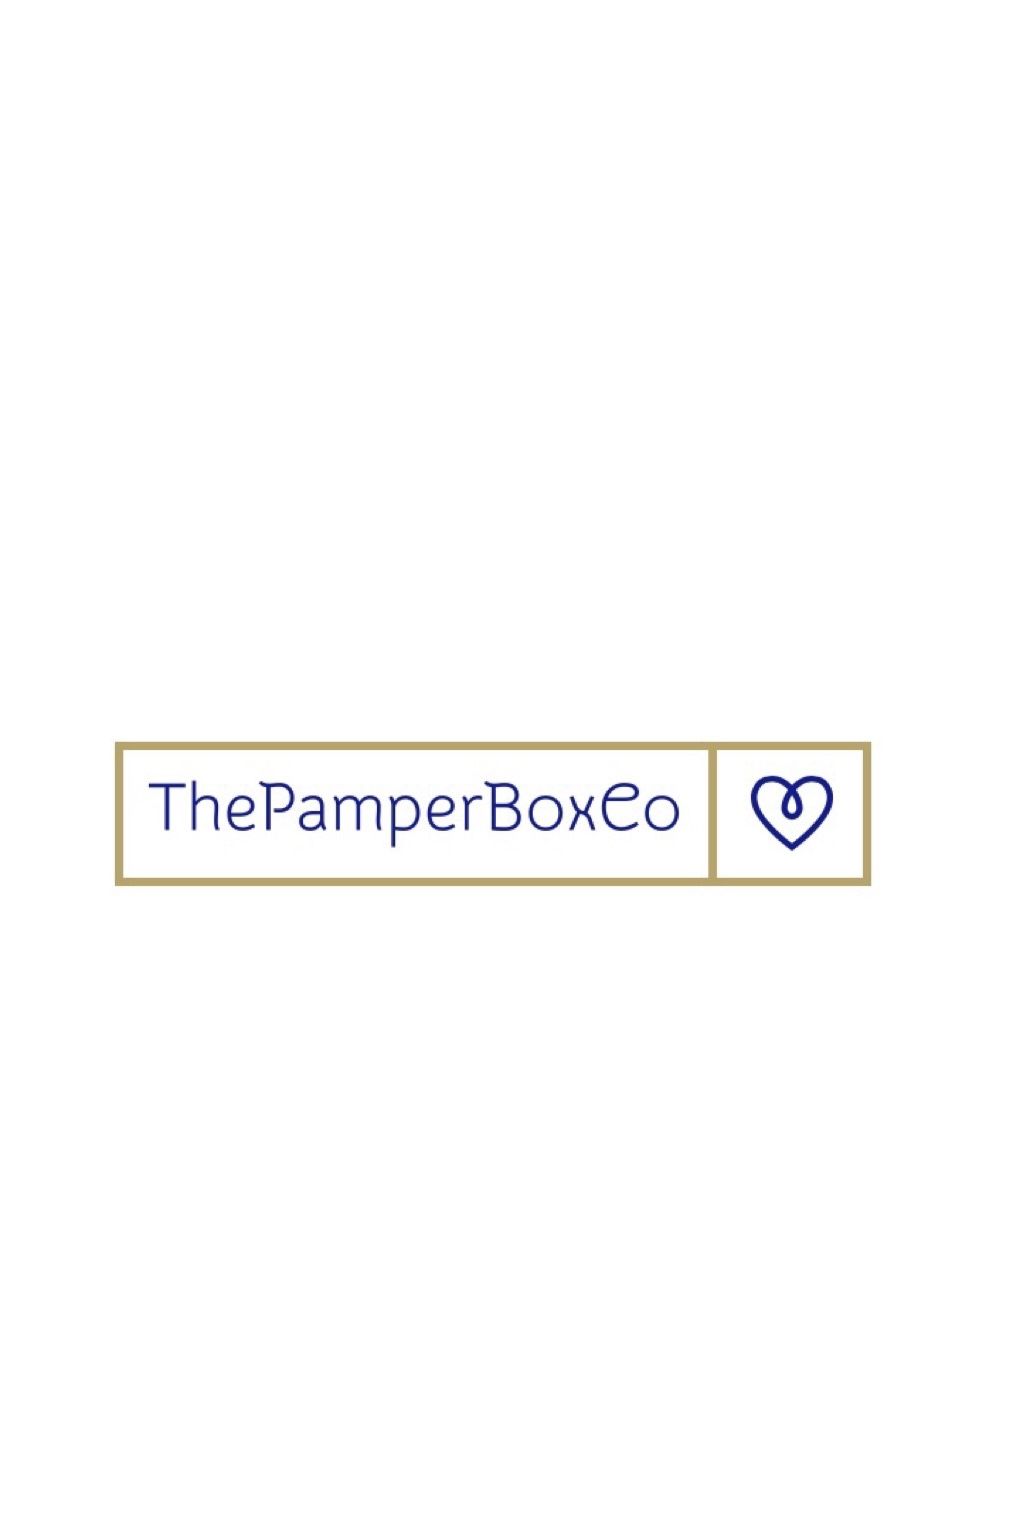 This shop is called ThePamperBoxCo 